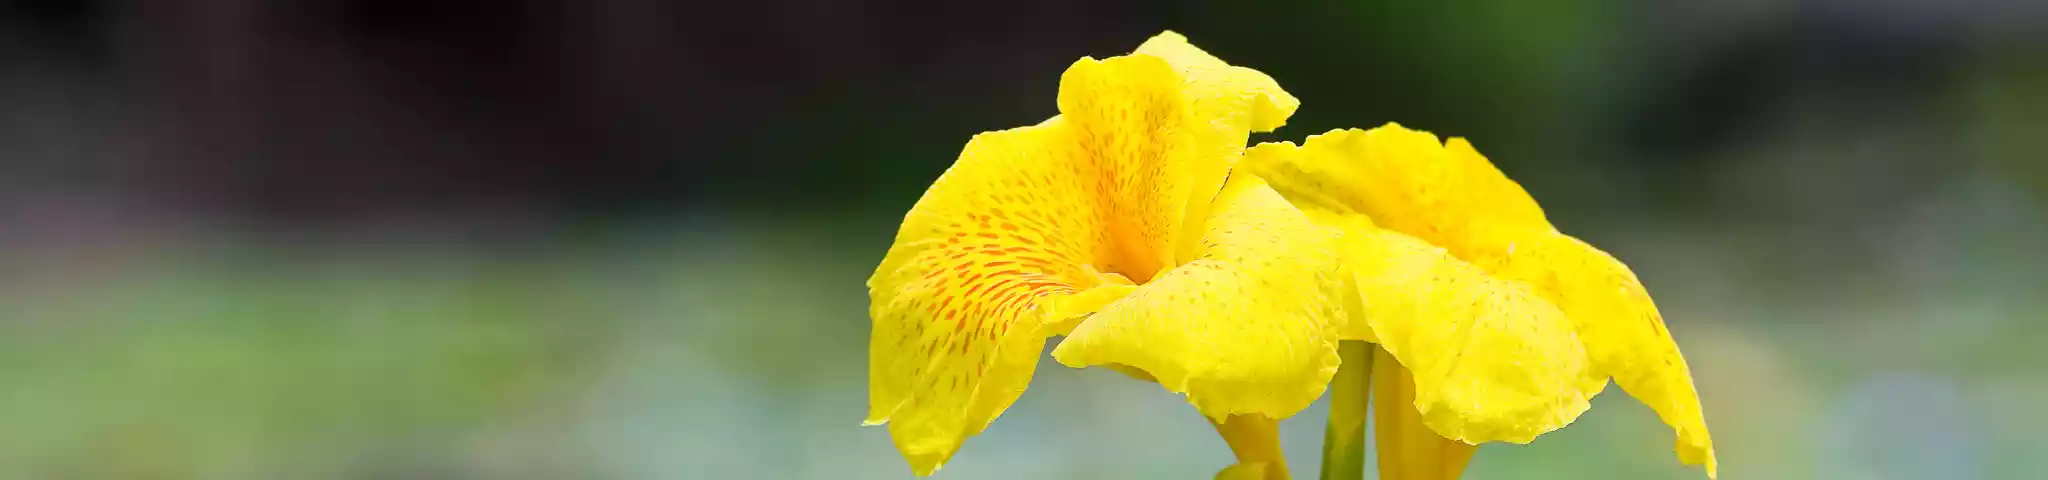 Water Canna Flowers